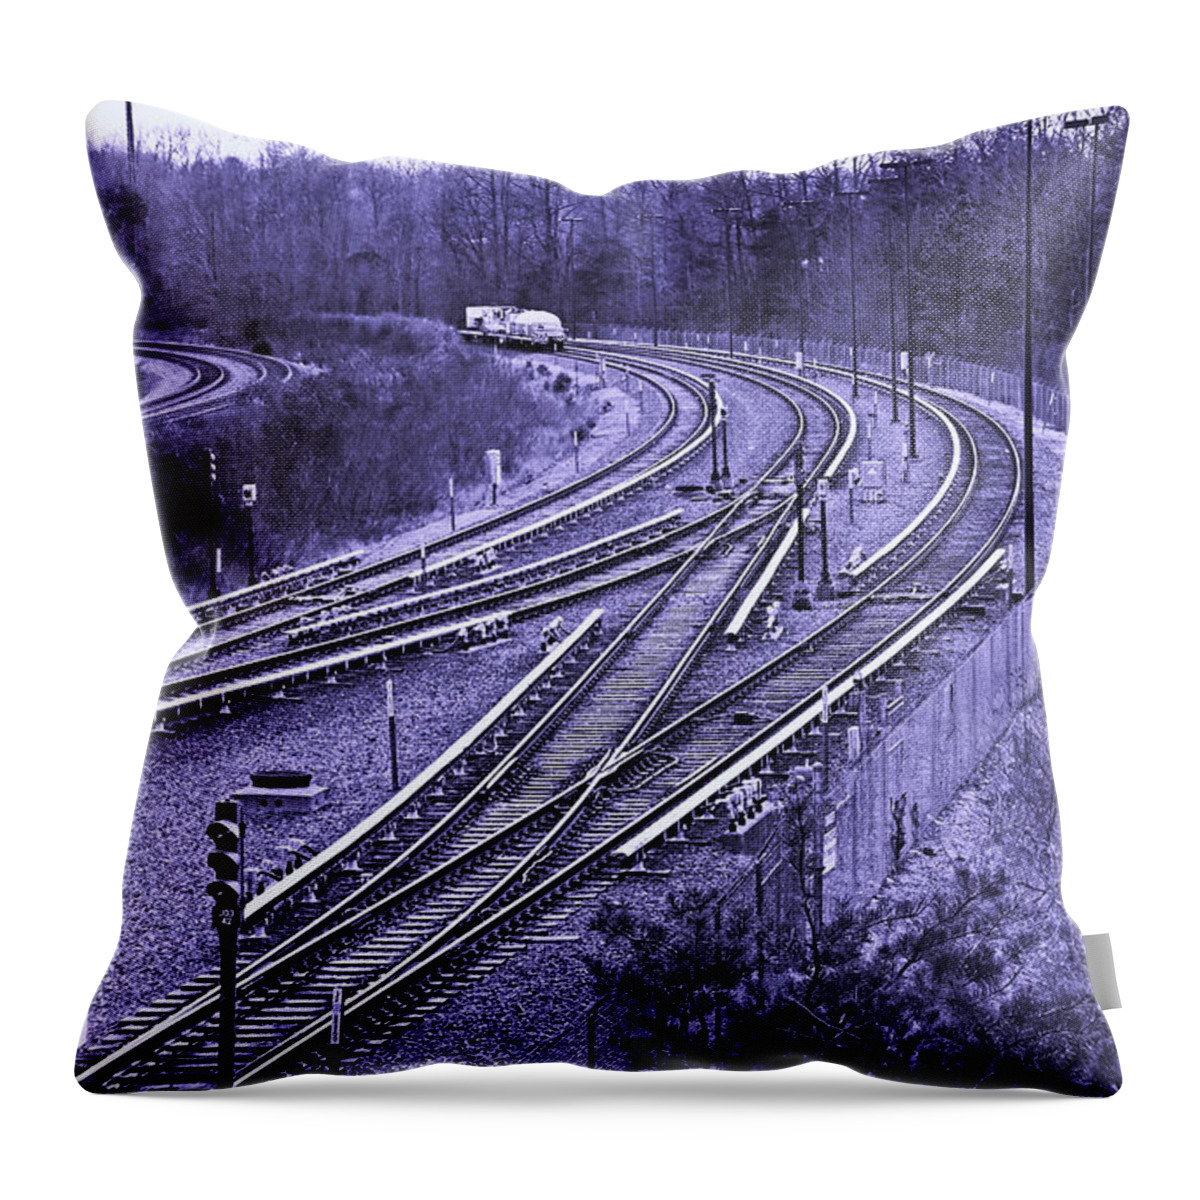 Railroad Throw Pillow featuring the photograph Where Are You Going To? by Iryna Goodall